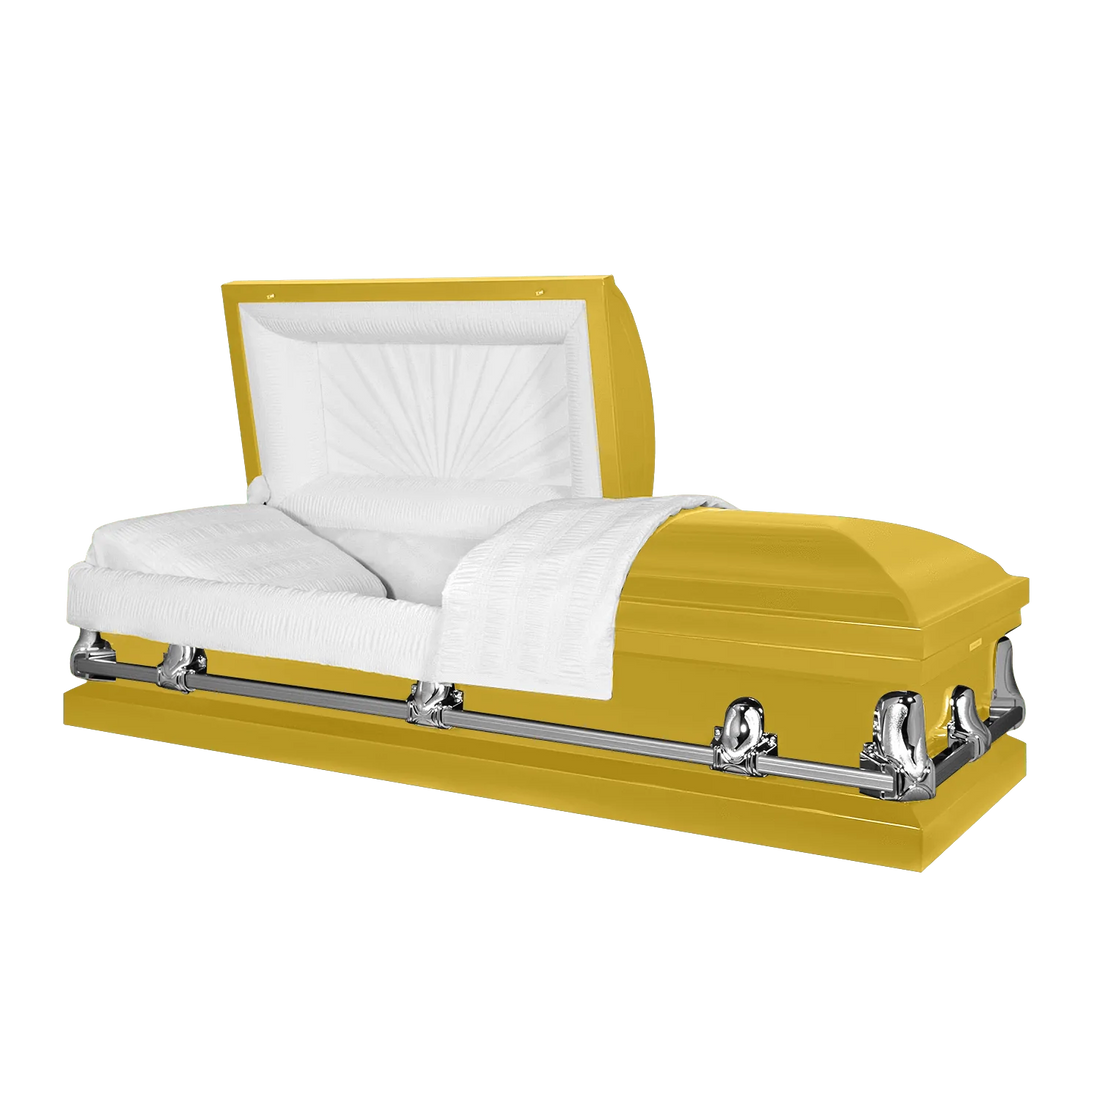 When And How To Buy A Yellow Color Casket?